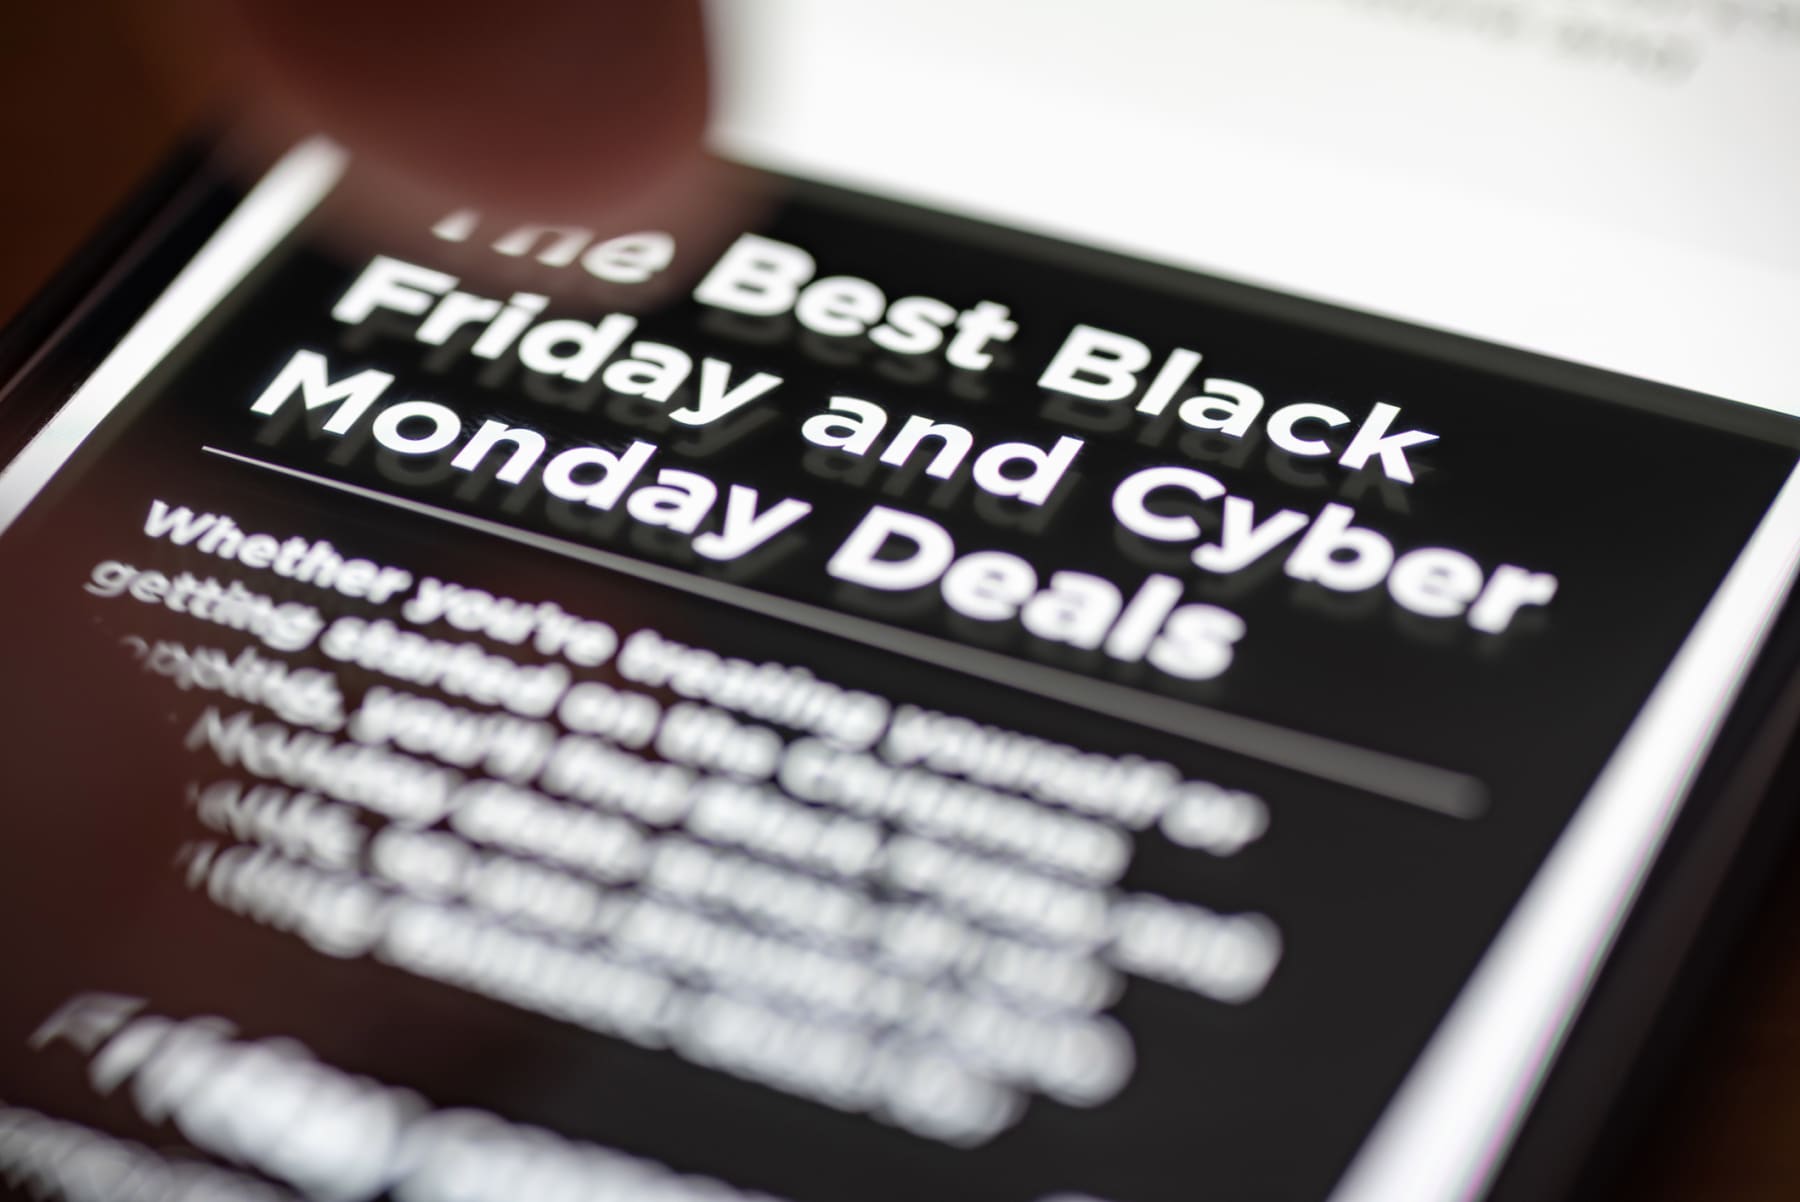 Black Friday and Cyber Monday deals on phone app